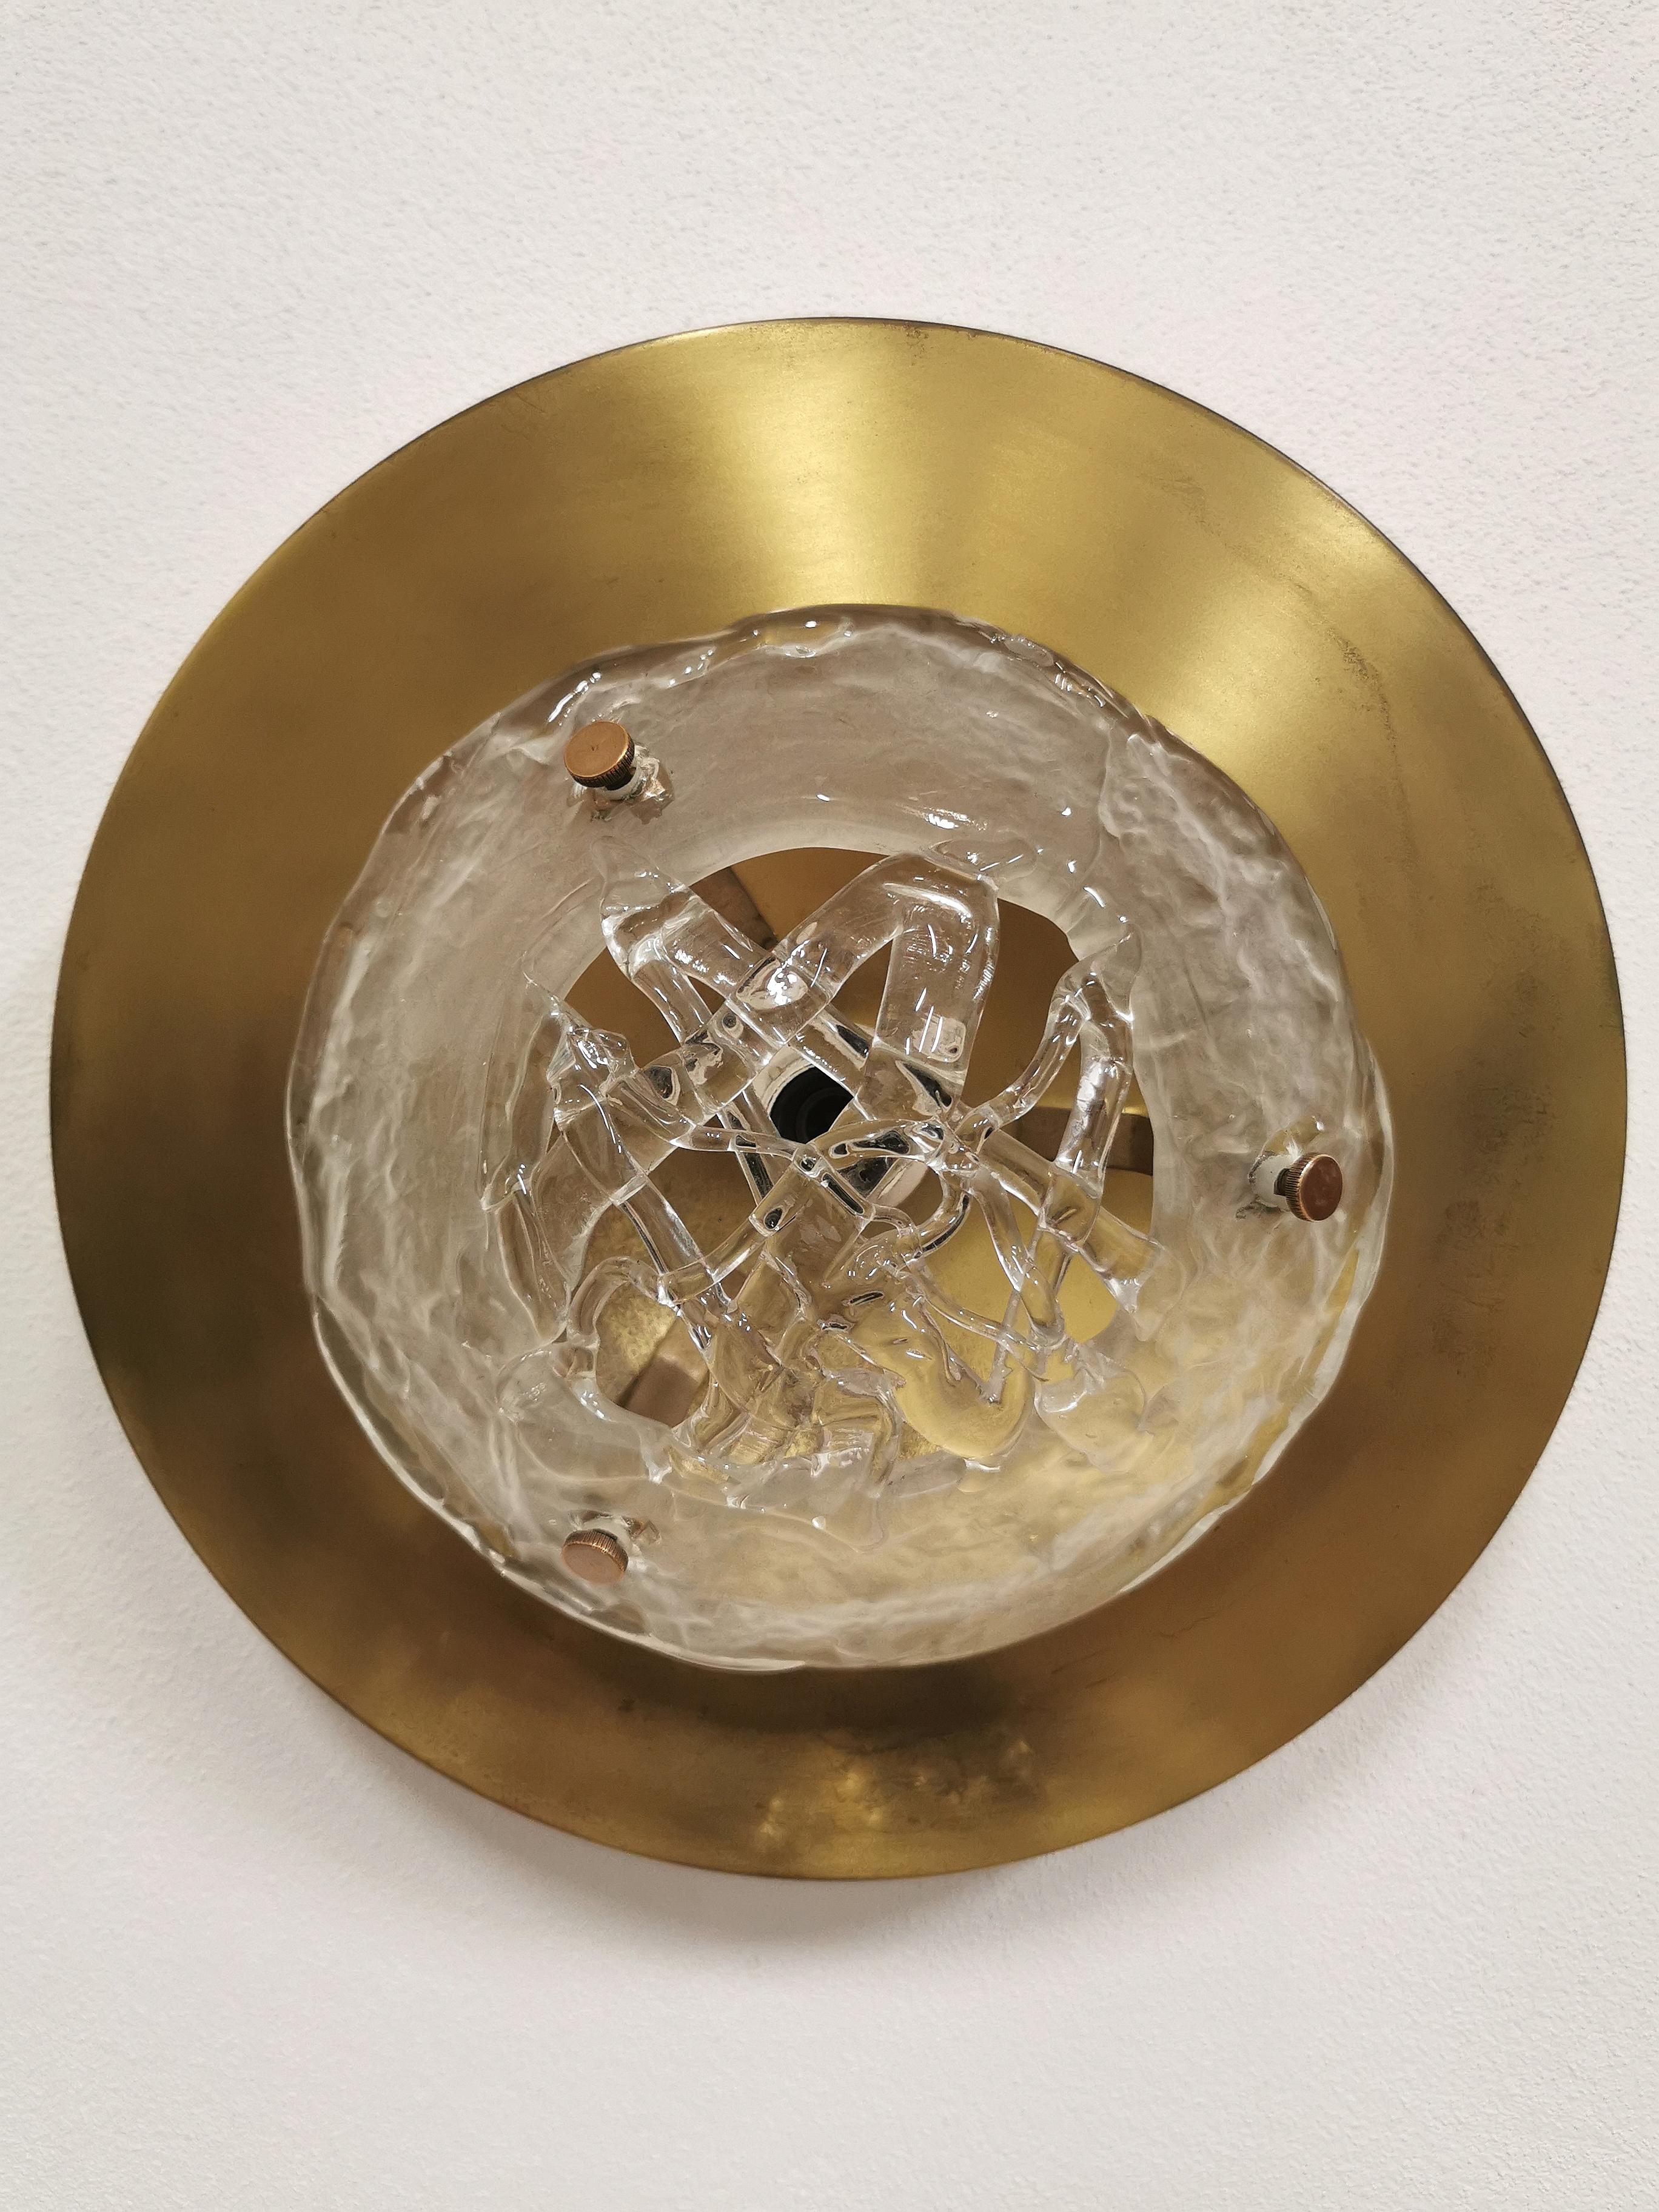 Wall lamp with an elegant design and appearance, Designed by Angelo Brotto and made by Esperia in Italy in the 1970s. The structure has a round brass frame where in the center of the lamp fixed with brass screws, there is an artistic Murano glass,